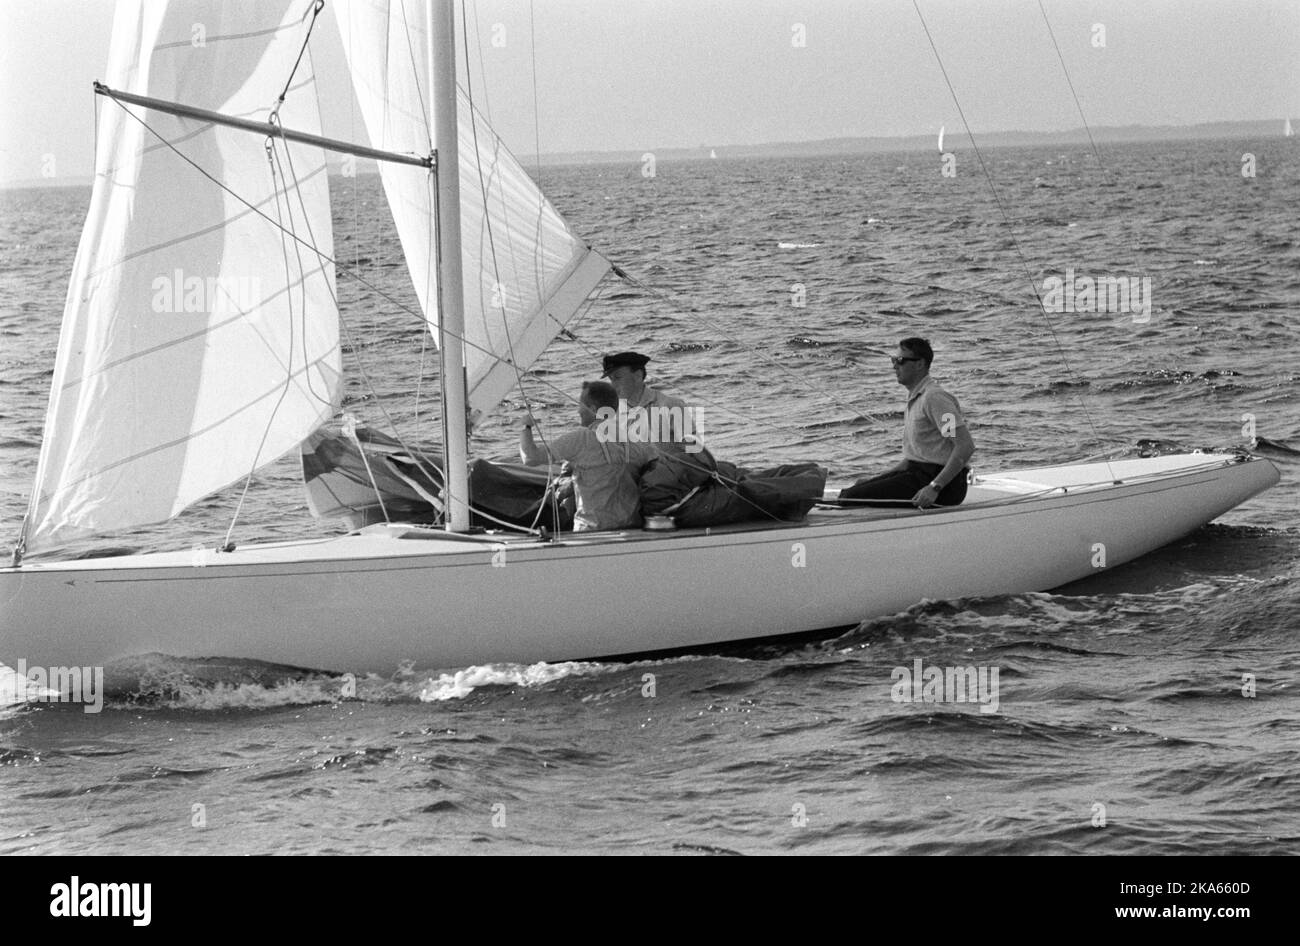 Prince Harald of Norway aboard the sailing boat Fram III during the 1964 Olympic Games in Tokyo, Japan Stock Photo